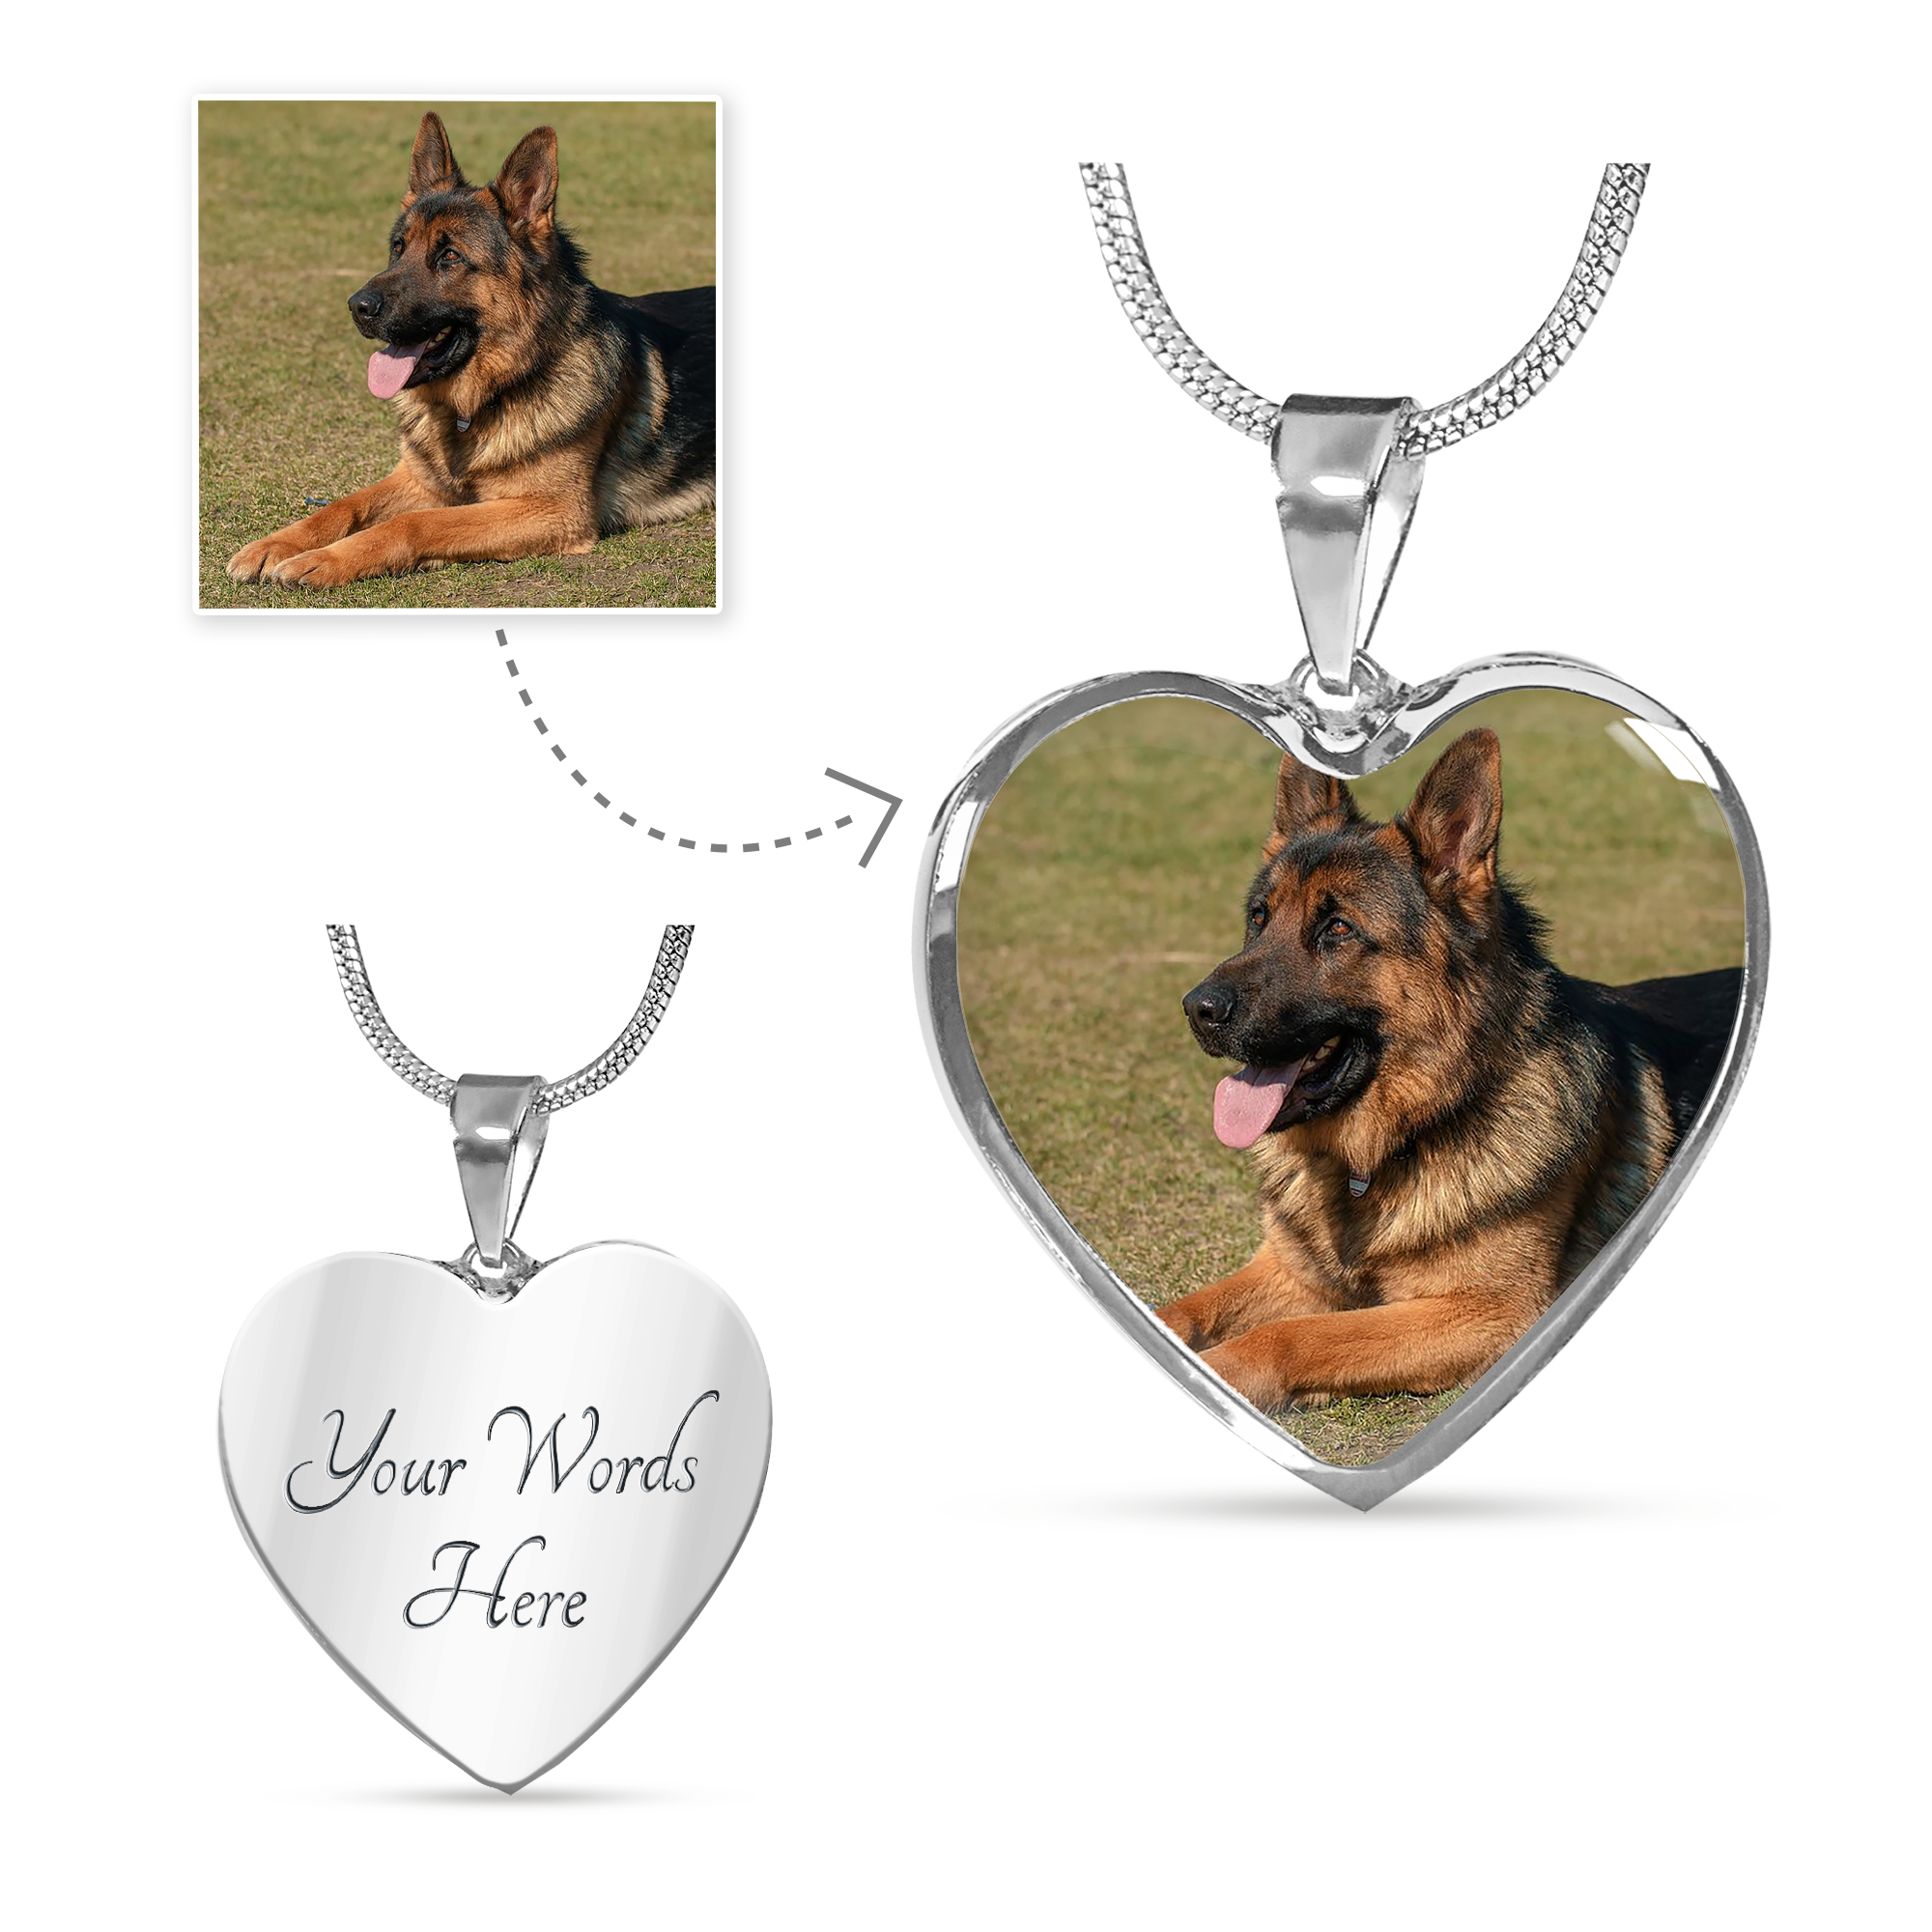 Personalized Photo Heart Necklace Or Bangle